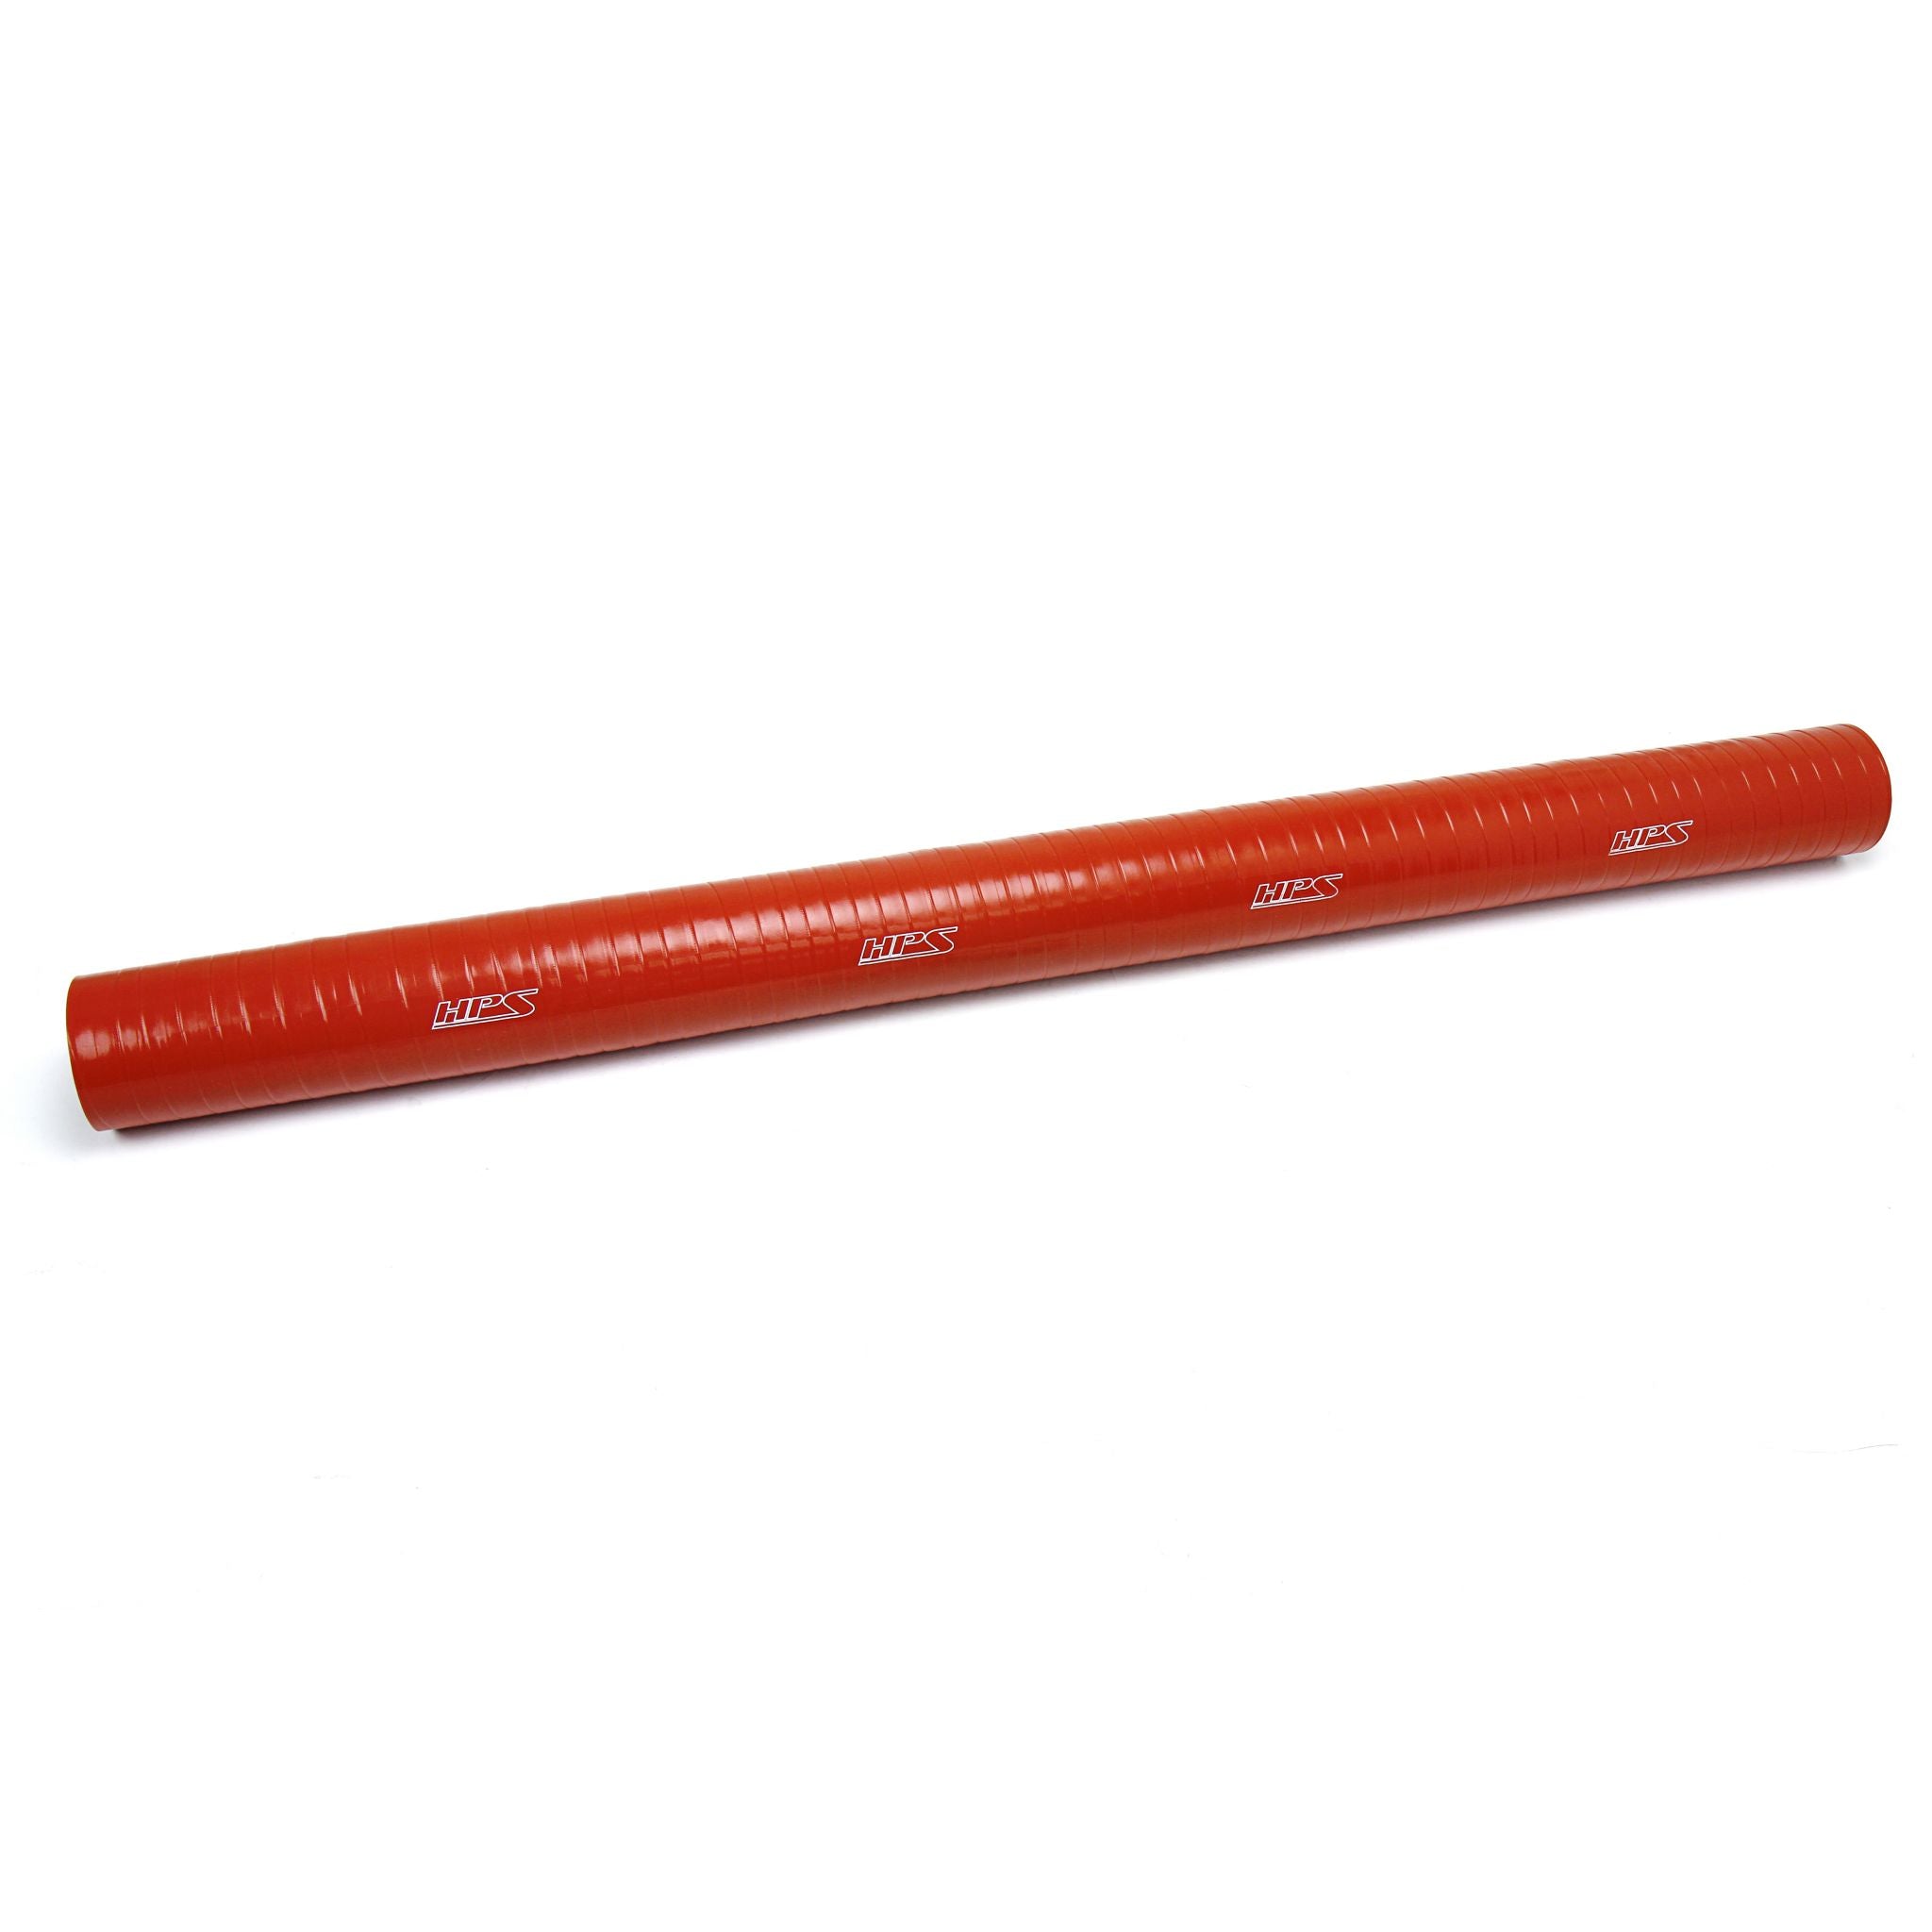 HPS Performance Silicone Coolant TubeUltra High Temp 4-ply Reinforced1" ID3 Feet Long